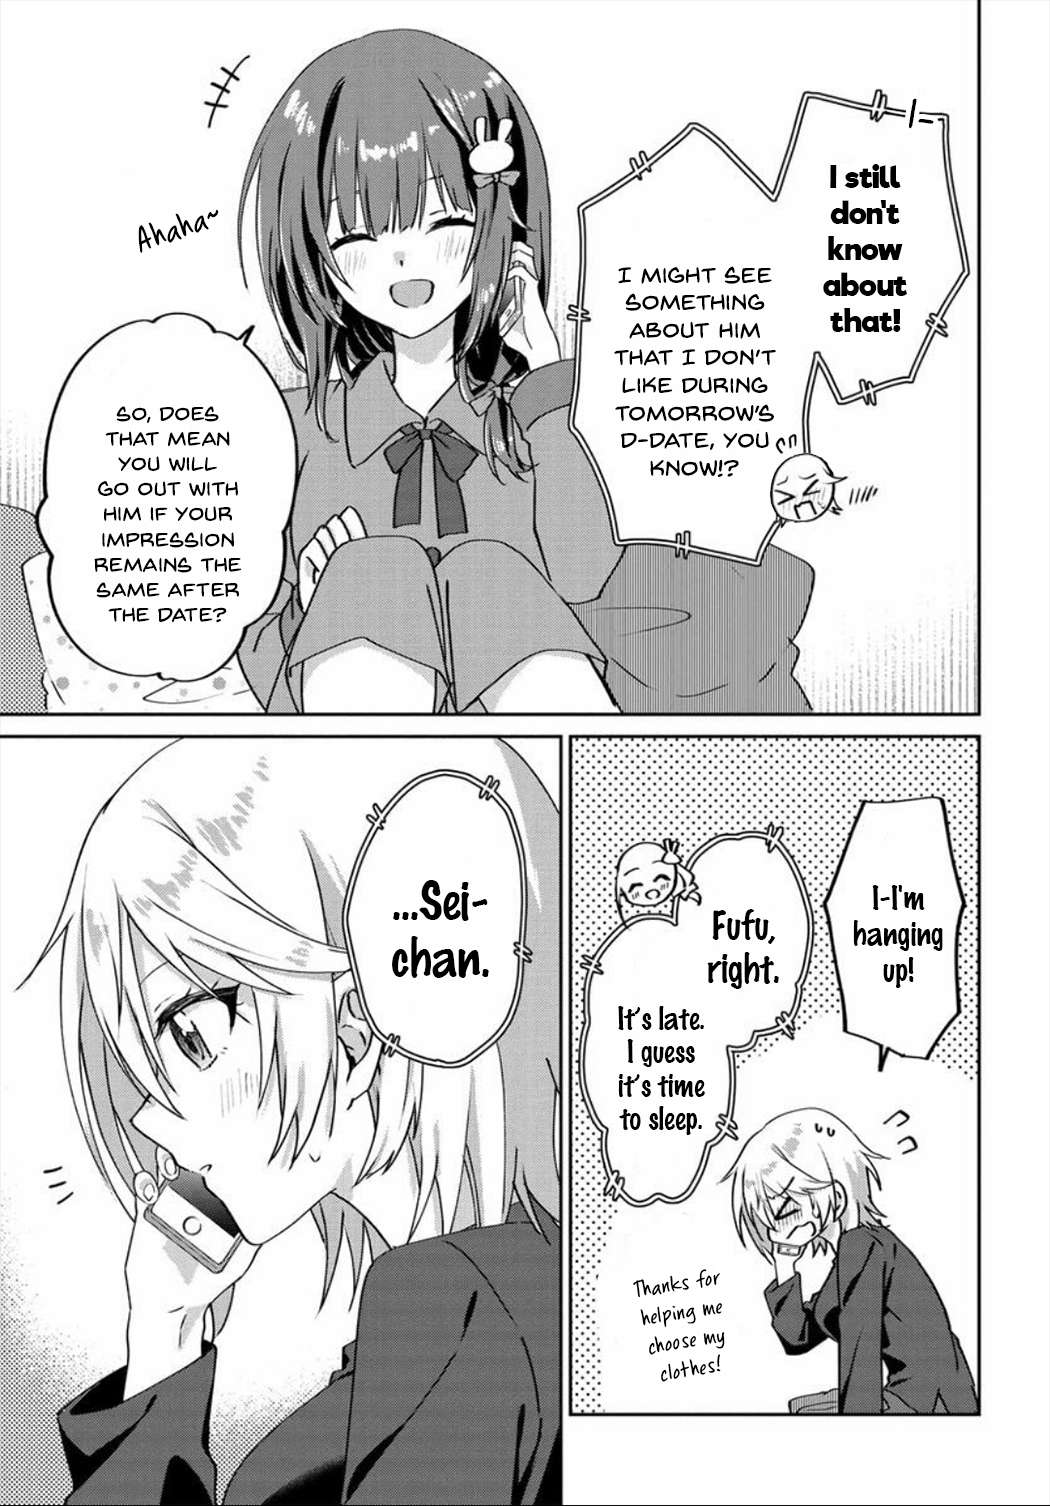 Since I’Ve Entered The World Of Romantic Comedy Manga, I’Ll Do My Best To Make The Losing Heroine Happy - chapter 6.6 - #5